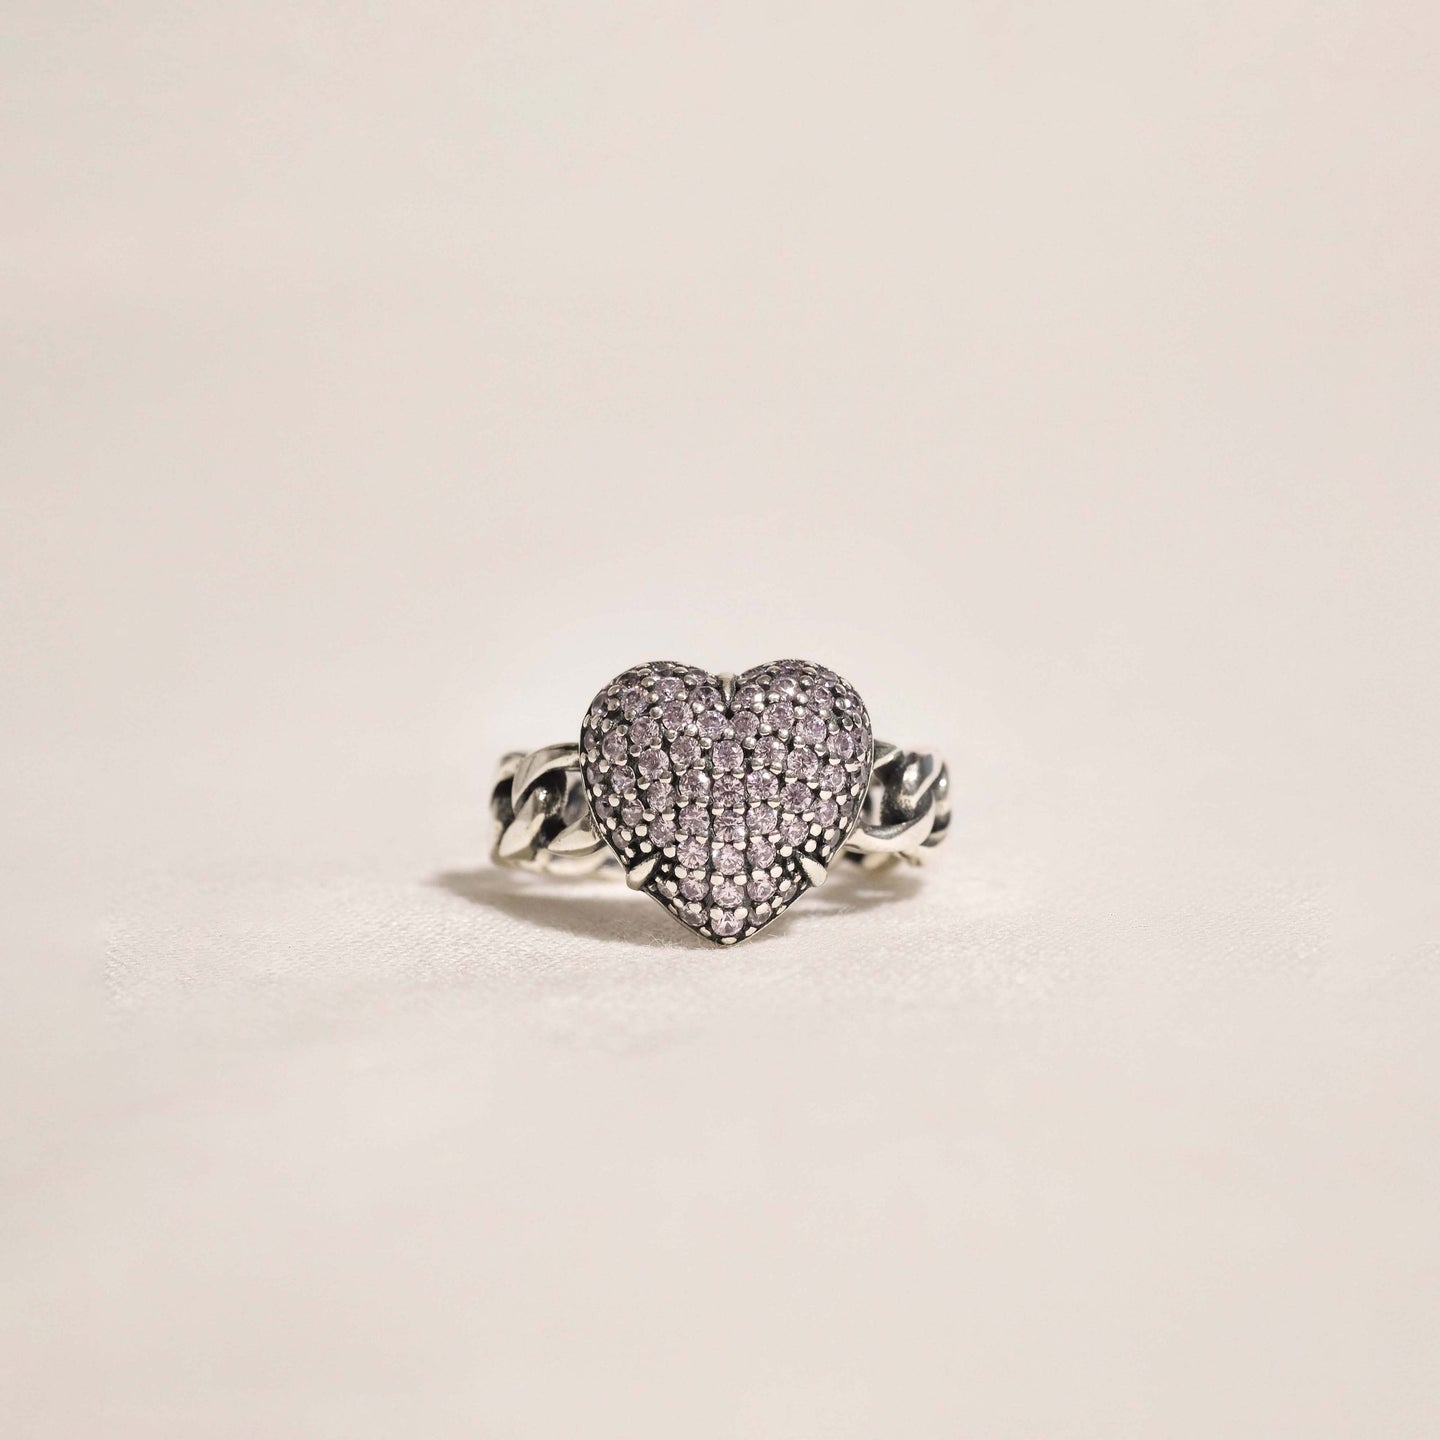 products/regala-cz-ring-925-sterling-silver-1.jpg